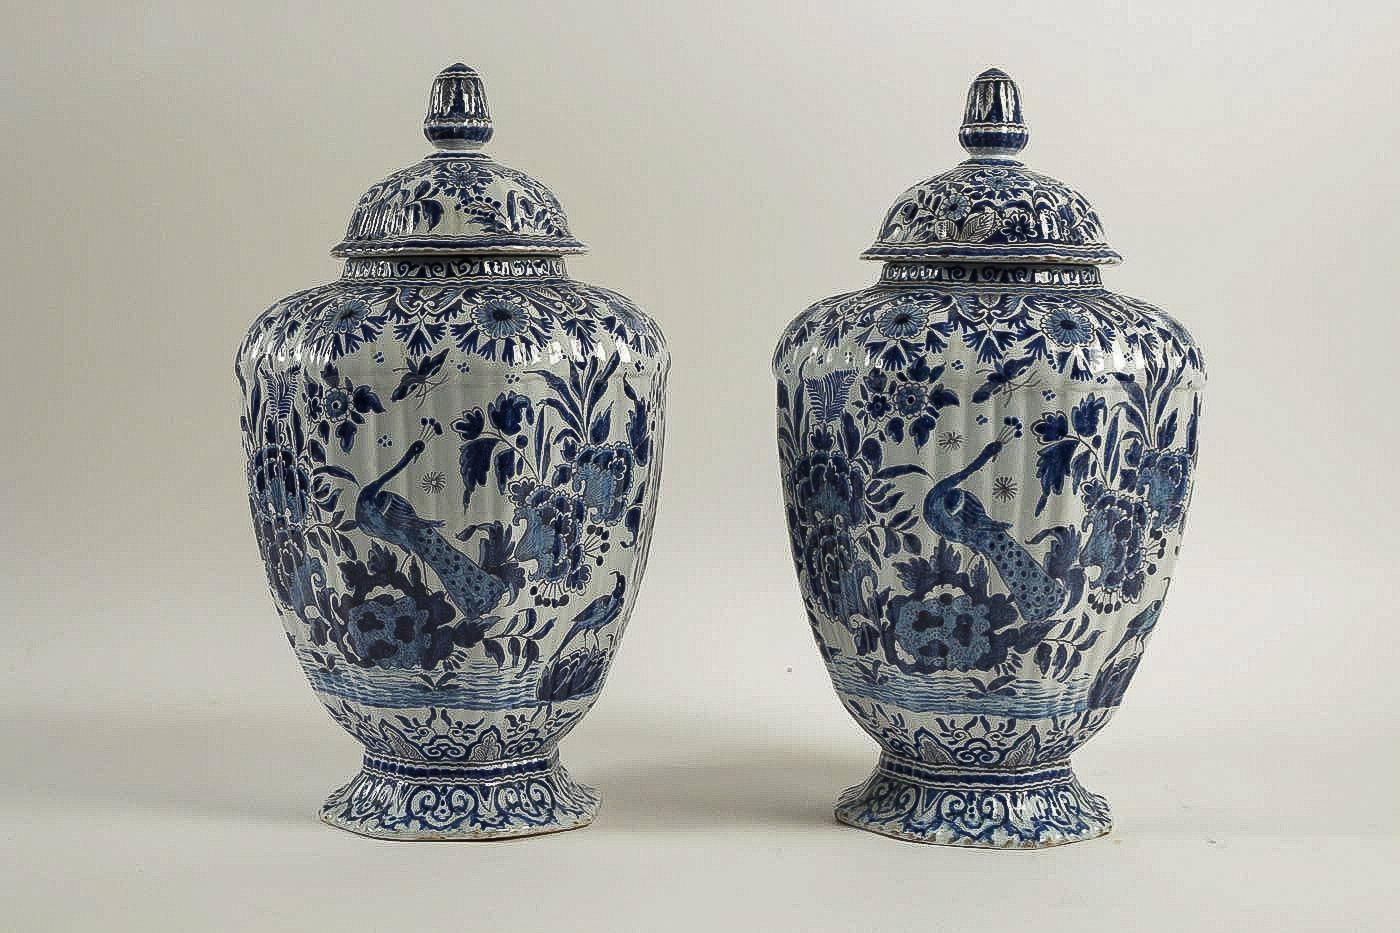 We are pleased to present you, Netherlands, exciting and decorative pair of early 19th century Delft vases, signed with a blue monogram. 

Excellent condition.

Dimensions: Height 14.96 inches, diameter 9.44 inches.